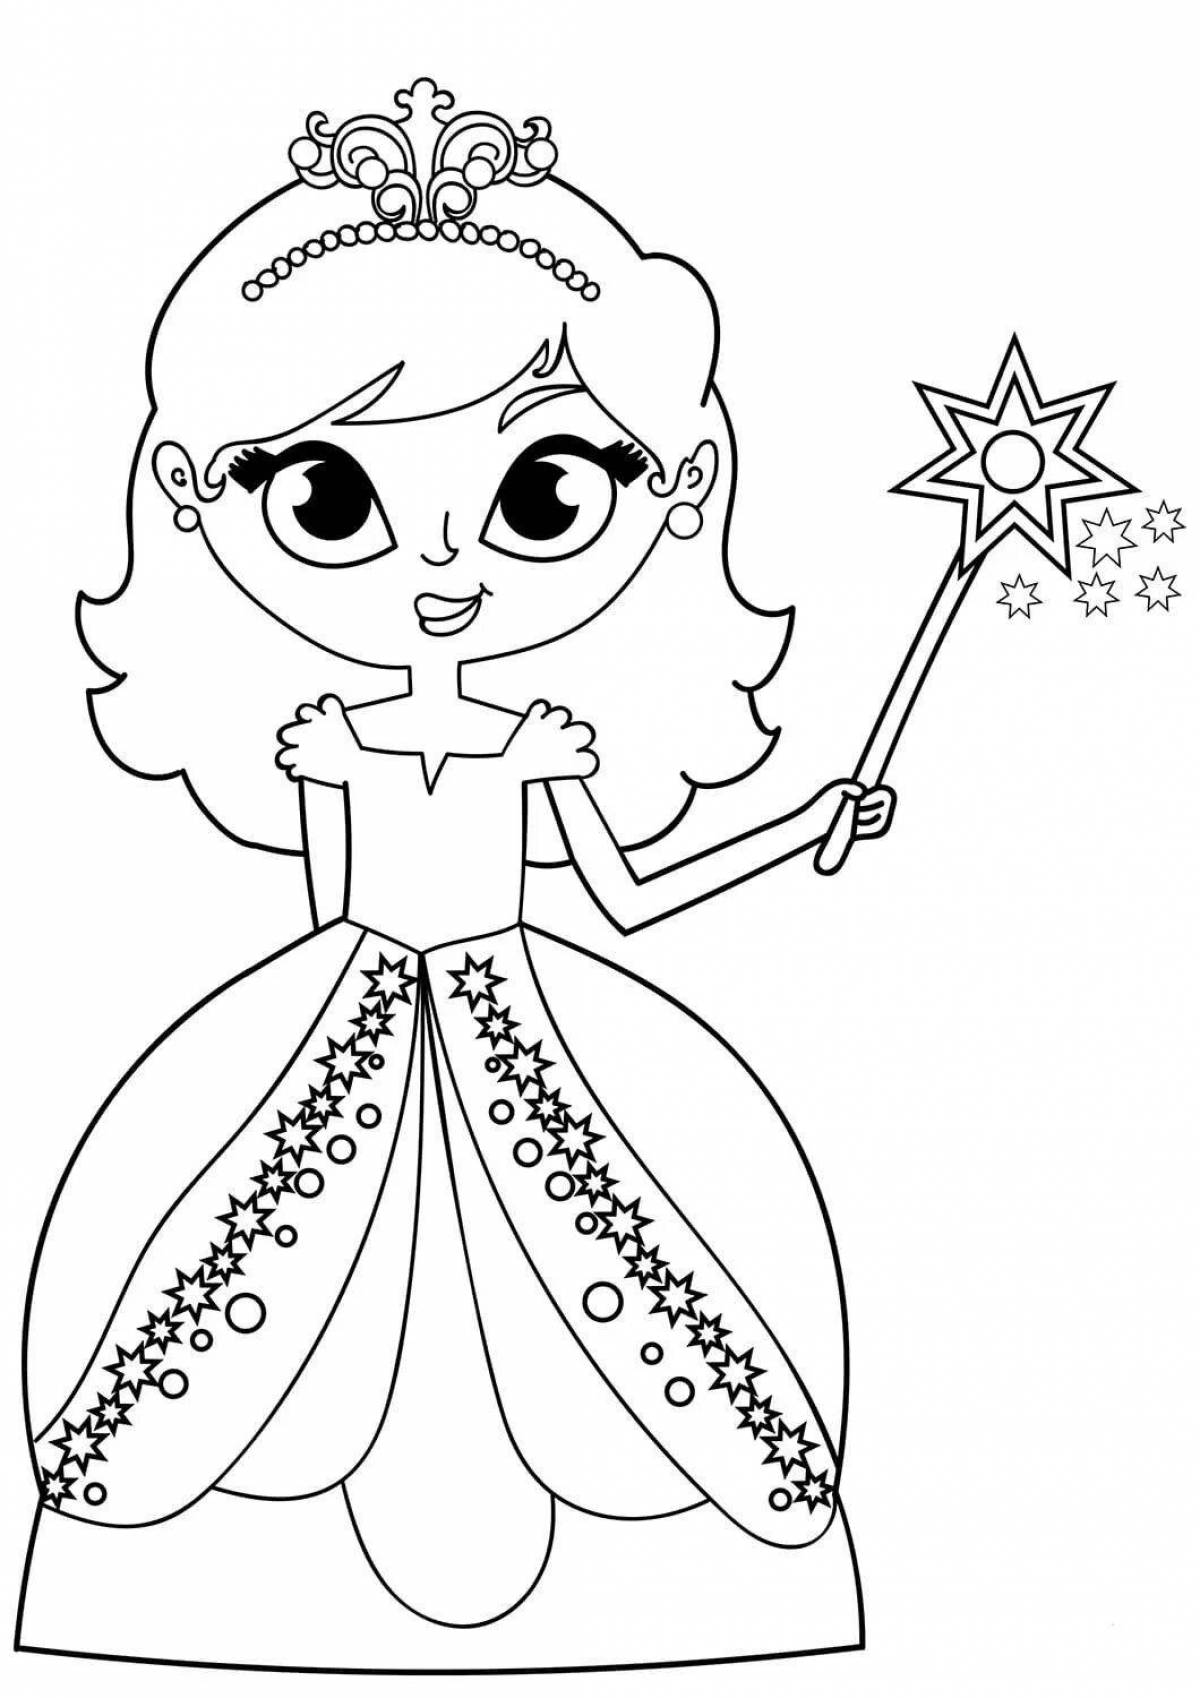 Cute coloring pages for little princesses